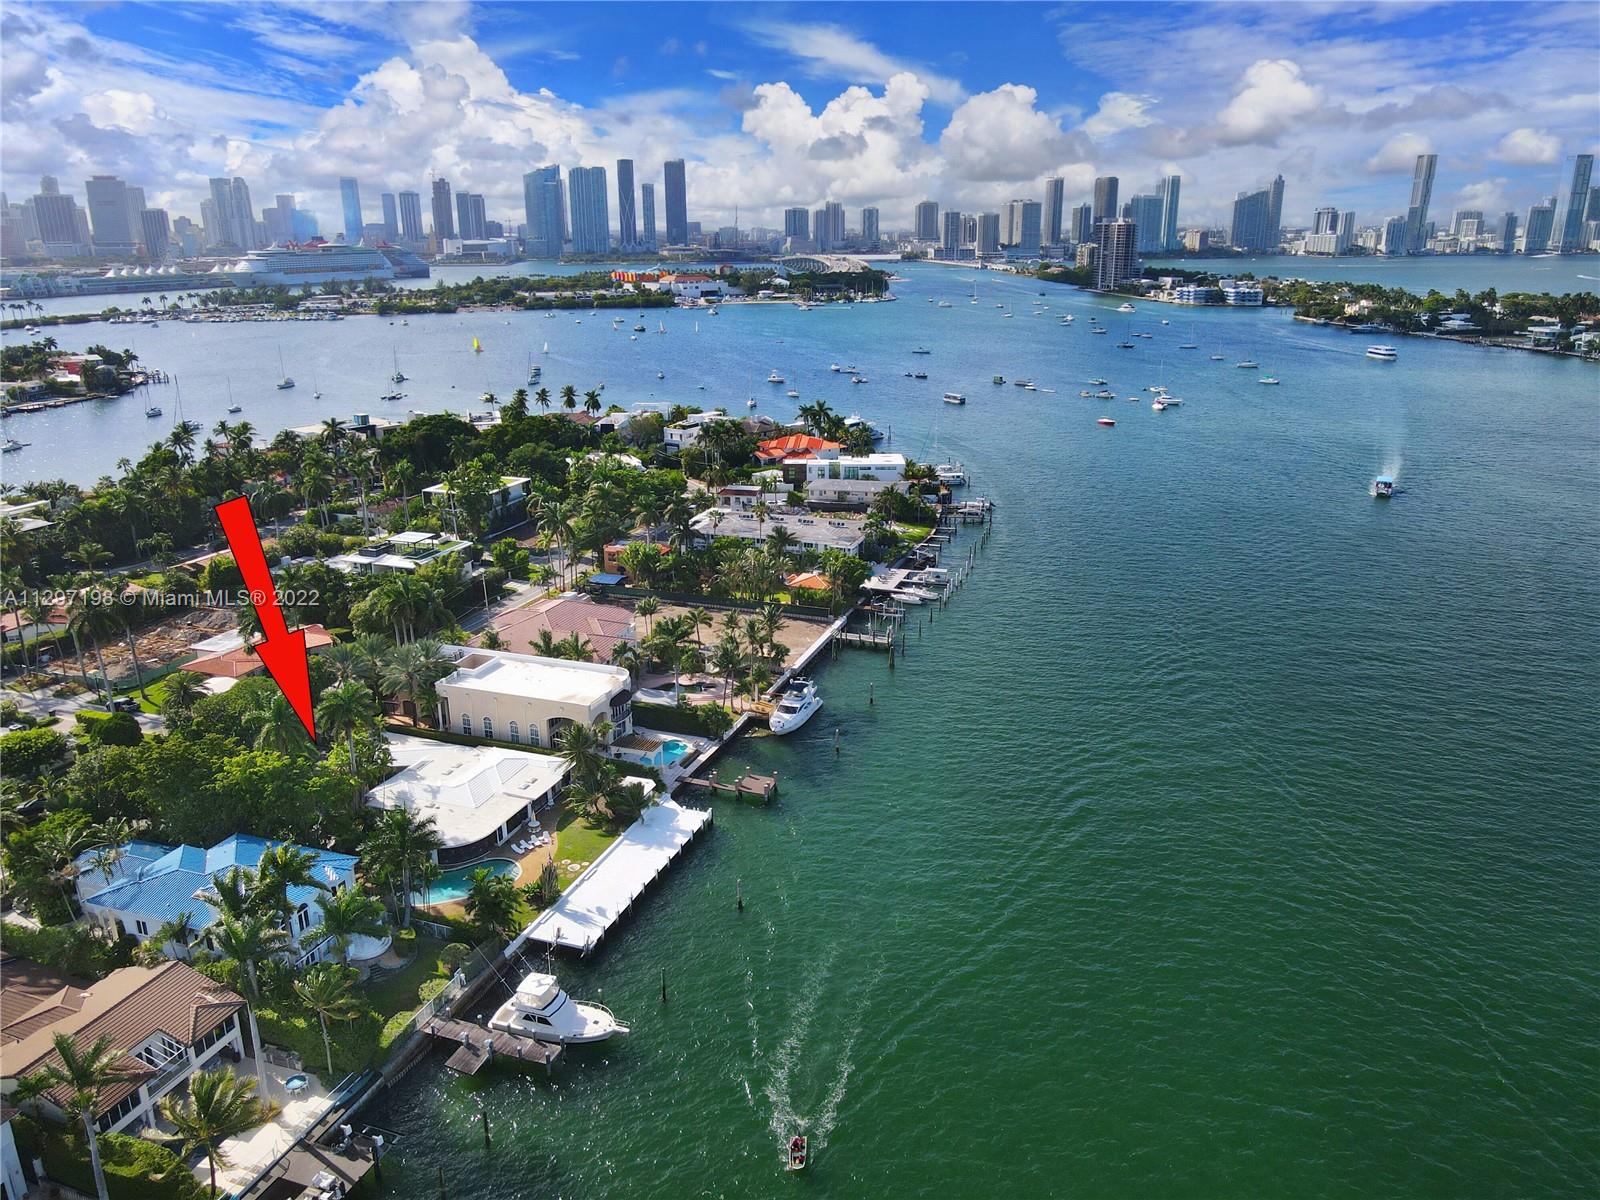 Listed for the first time in 45 years, this rare to market home is located on a 21,000 SF double lot with 120' on the wide water and a huge dock for your yacht.  Undoubtedly the best wide inter-coastal views on the islands, this house faces NE for stunning sunrises.  This double lot can be divided to build 2 new homes or build one huge dream home on the full 1/2 acre.  The home is a time capsule from the 1970's and ready to remodel or replace.  Minutes to SOBE and the beaches. This is what Miami is all about. Please do not disturb the owners.  Note developers: build two 5,000 sf homes and sell them for over a 30% profit.